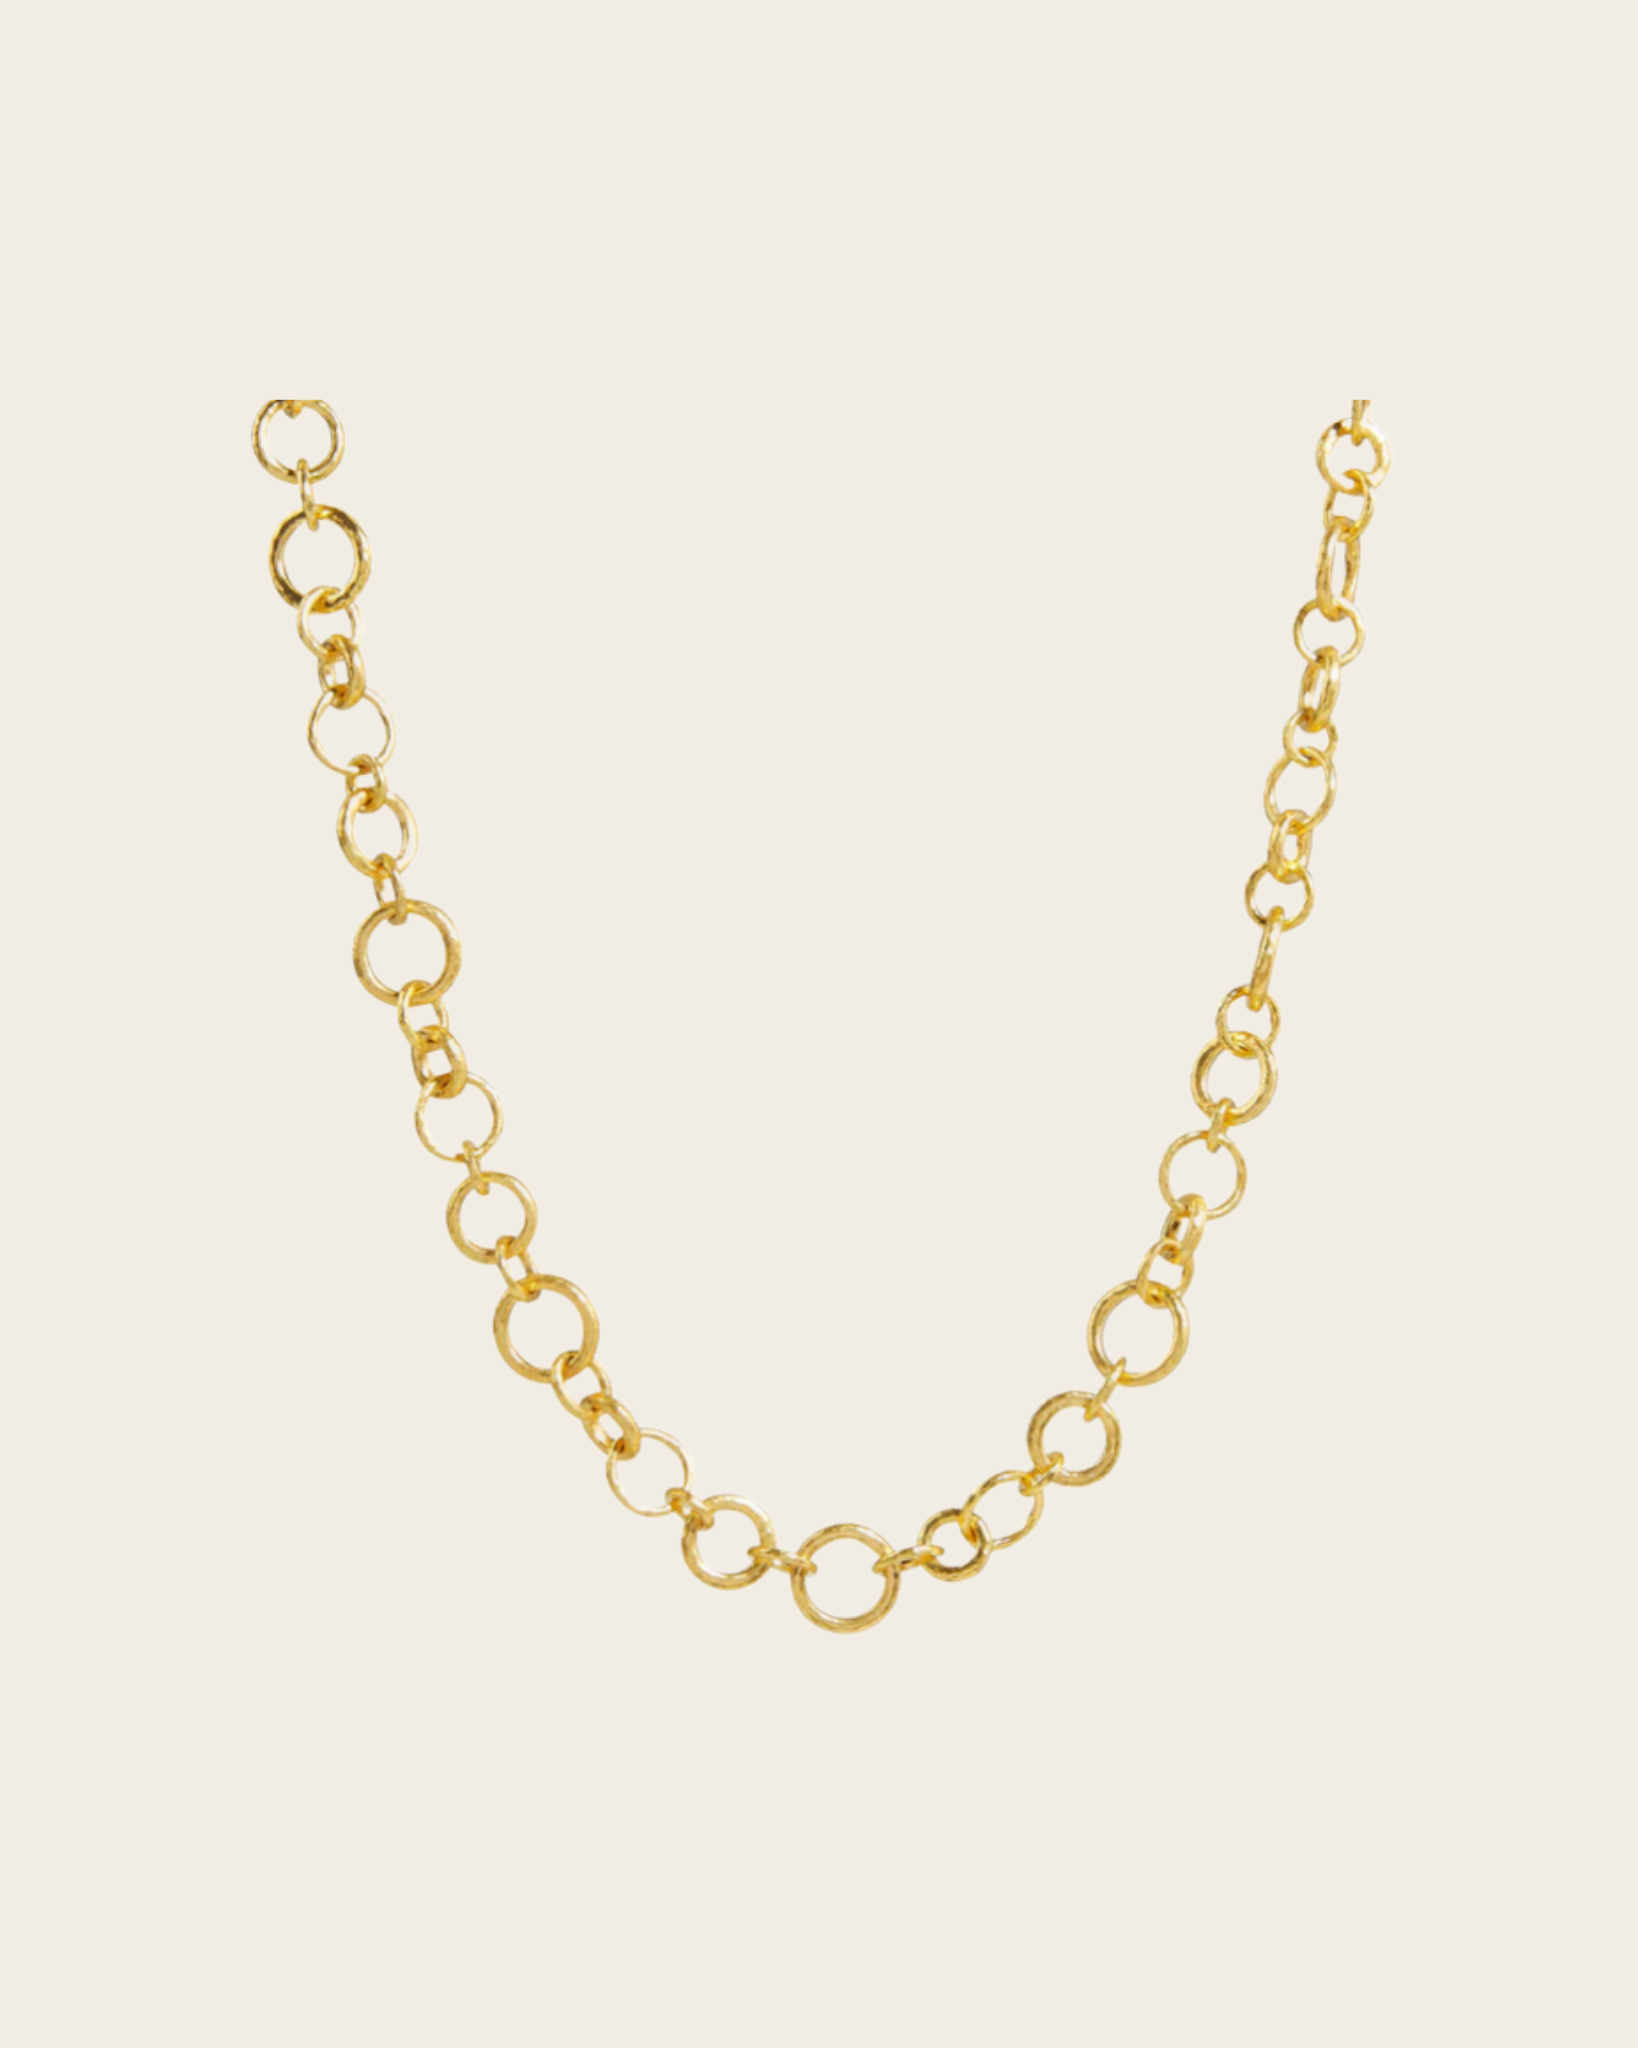 GURHAN Hoopla Gold Link Short Necklace, Mixed Round, No Stone